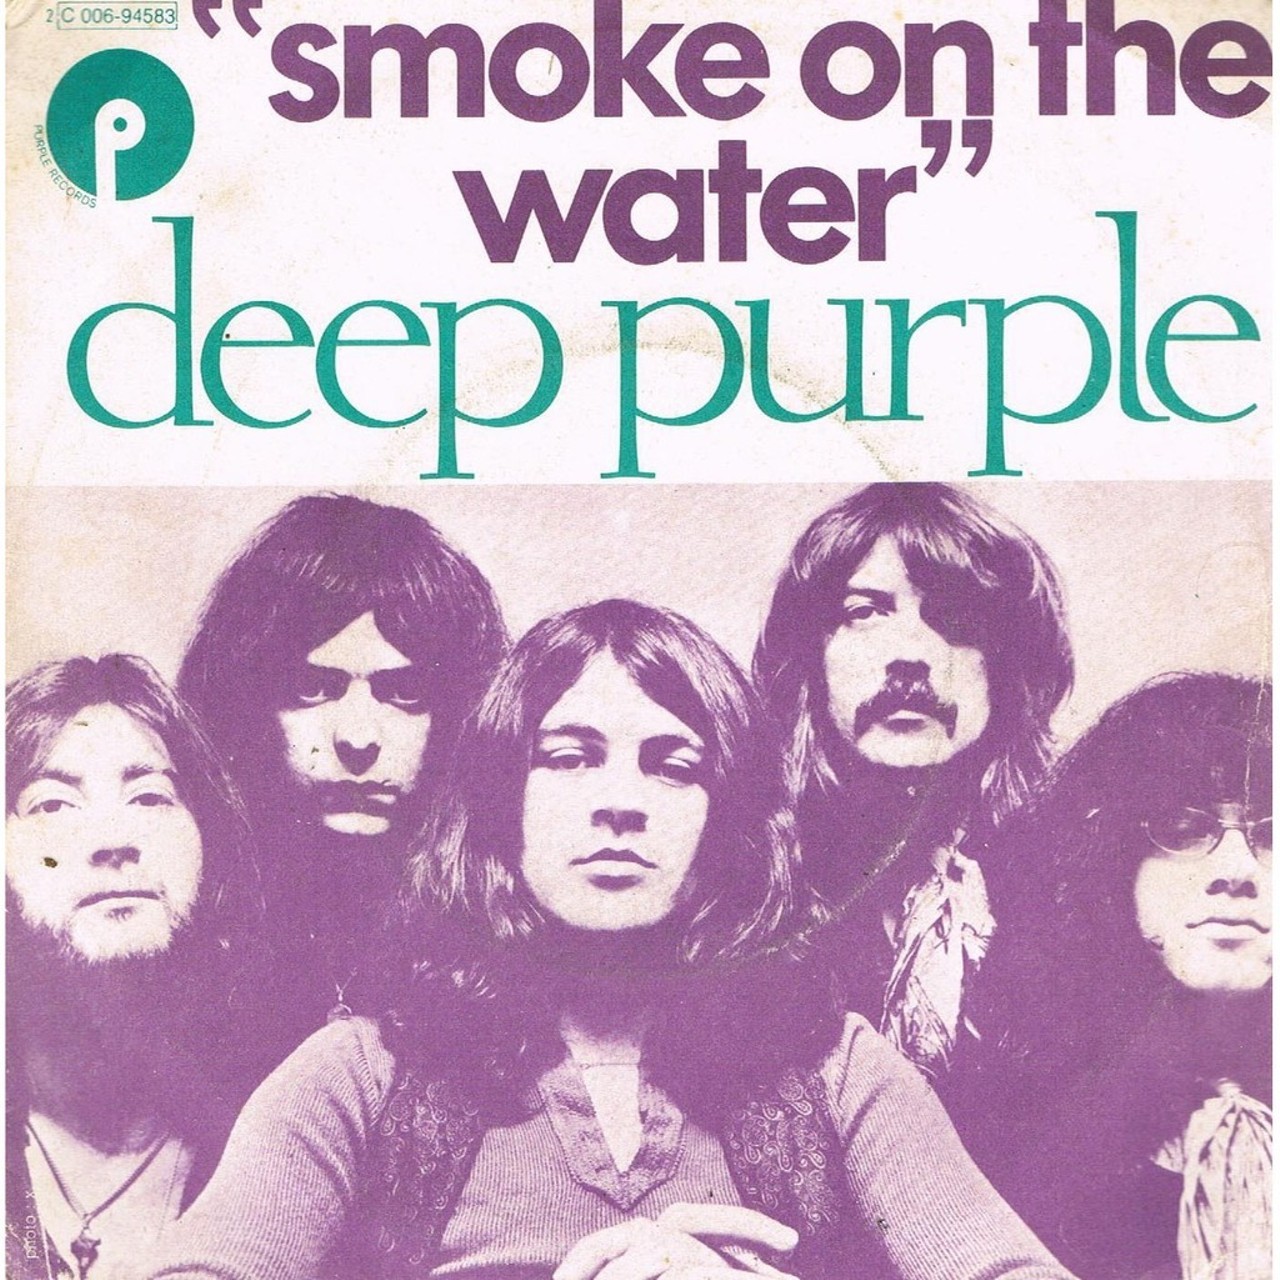 Deep Purple recorded "Smoke on the Water" for their 1972 album "Machine Head." There's a good chance you may recognize this song based on the opening guitar riffs alone, which ranks No. 4 in Total Guitar Magazines Greatest Guitar Riffs Ever. The song itself topped U.S. charts at No. 4, and No. 2 in Canada.